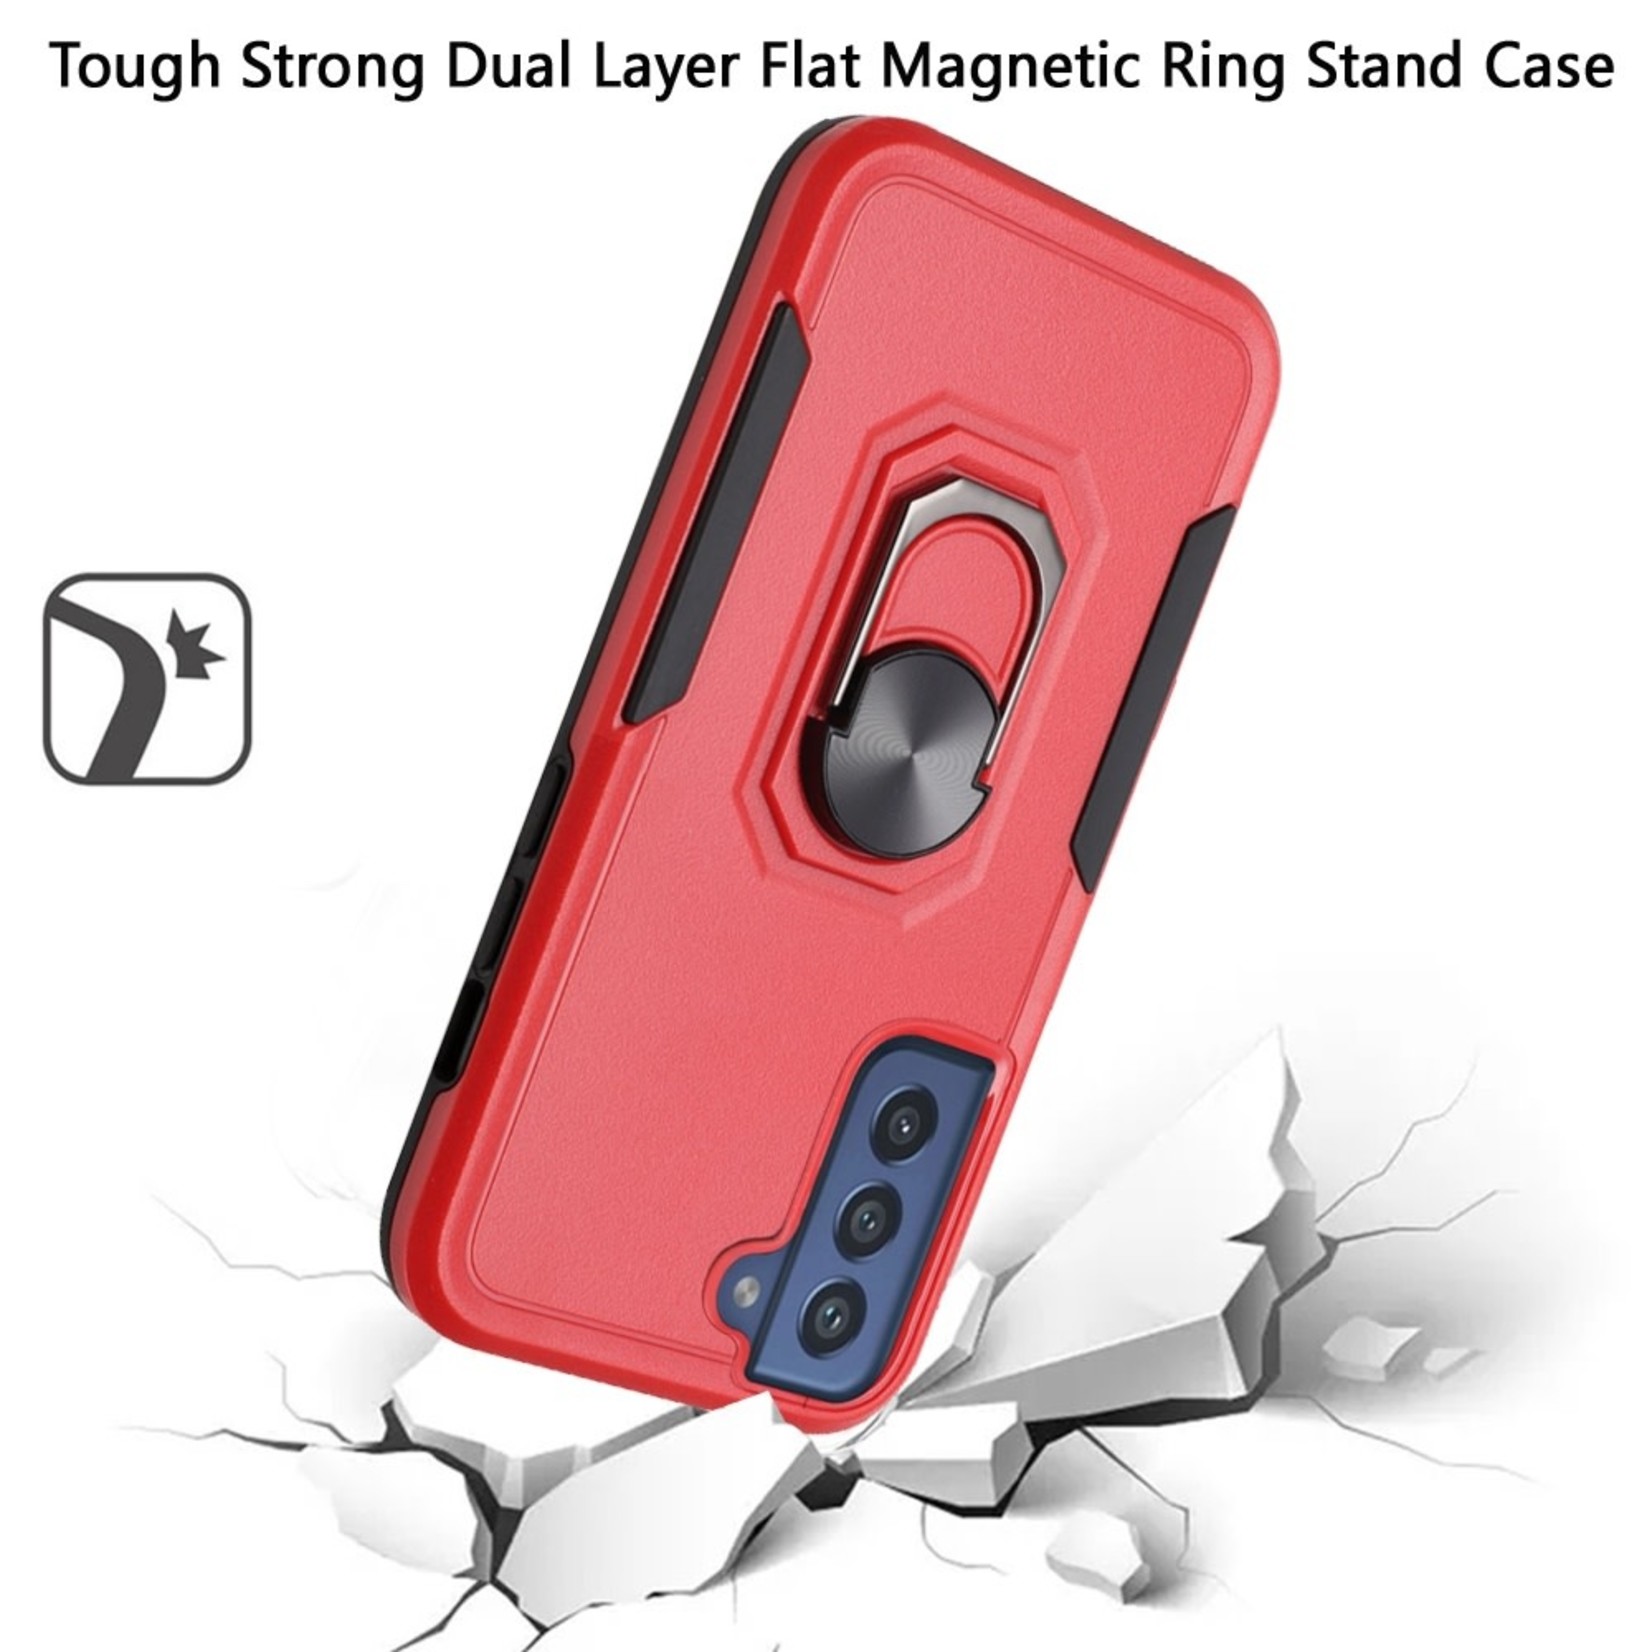 Samsung Tough Strong Dual Layer Flat Magnetic Ring Stand Case Cover - Red For Samsung Galaxy S22